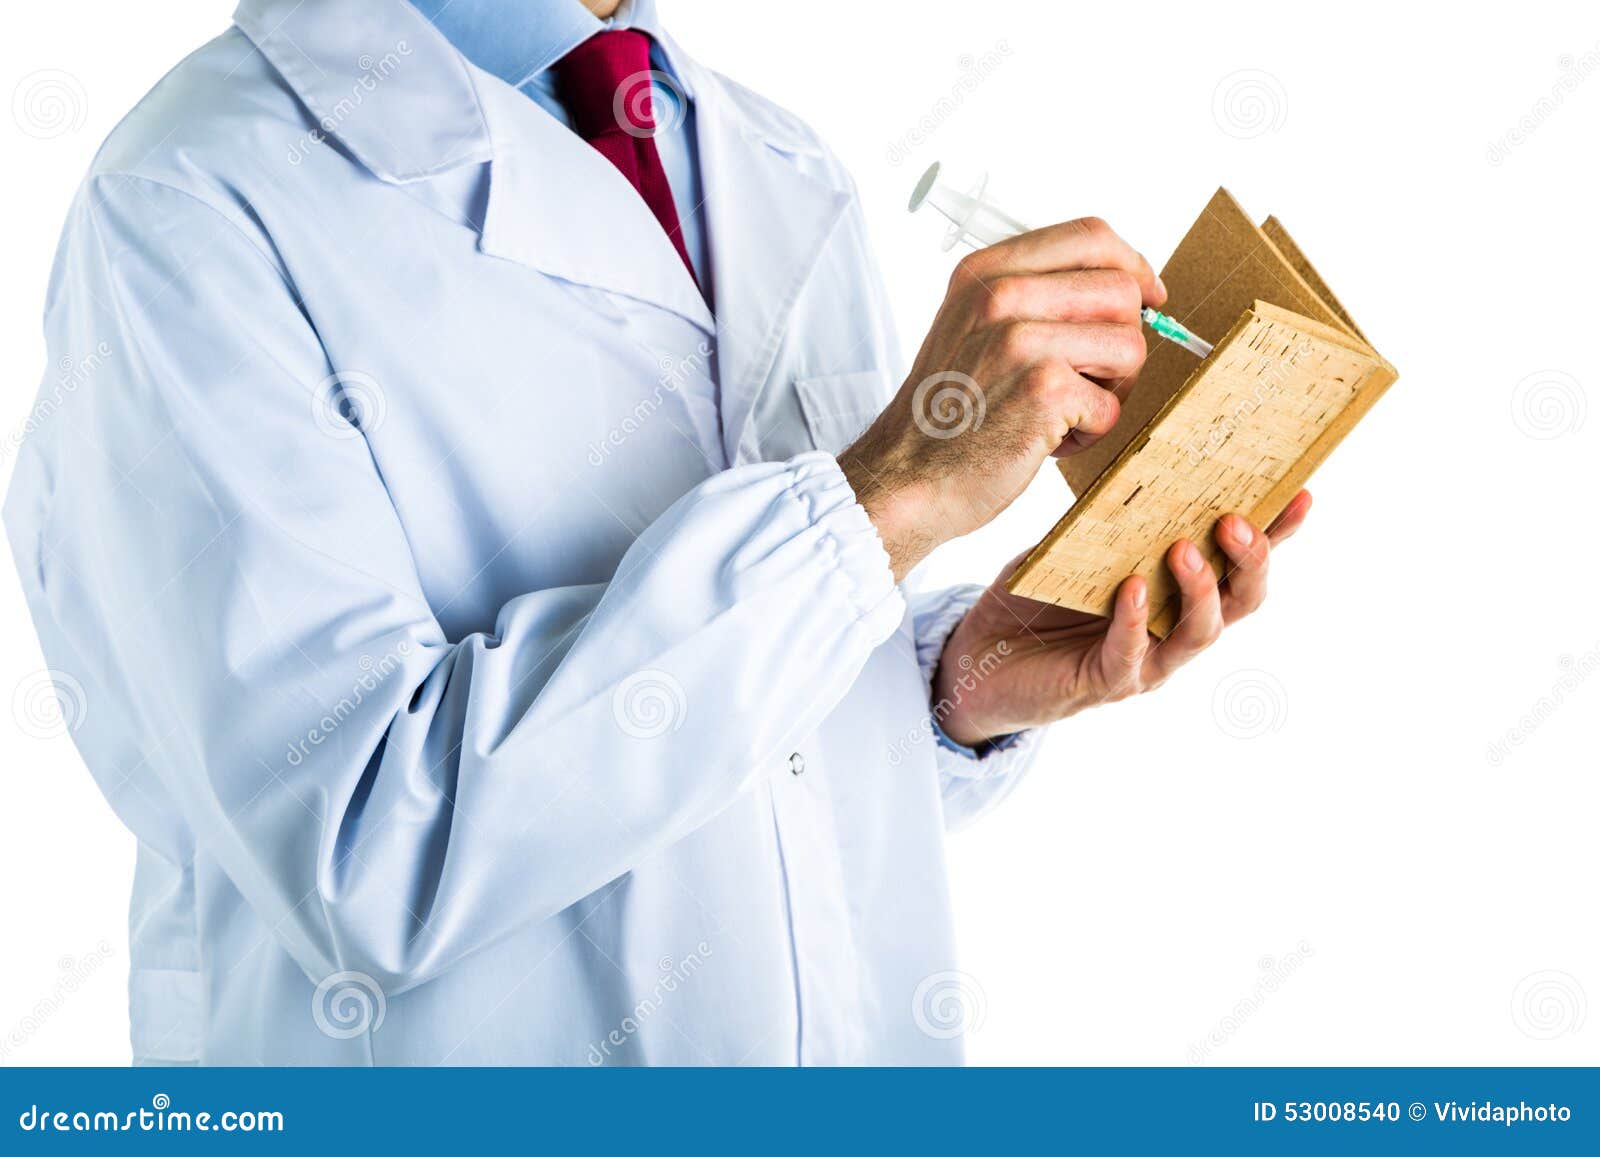 Doctor In White Coat Writing In Cork Book With Syringe Stock Photo ...